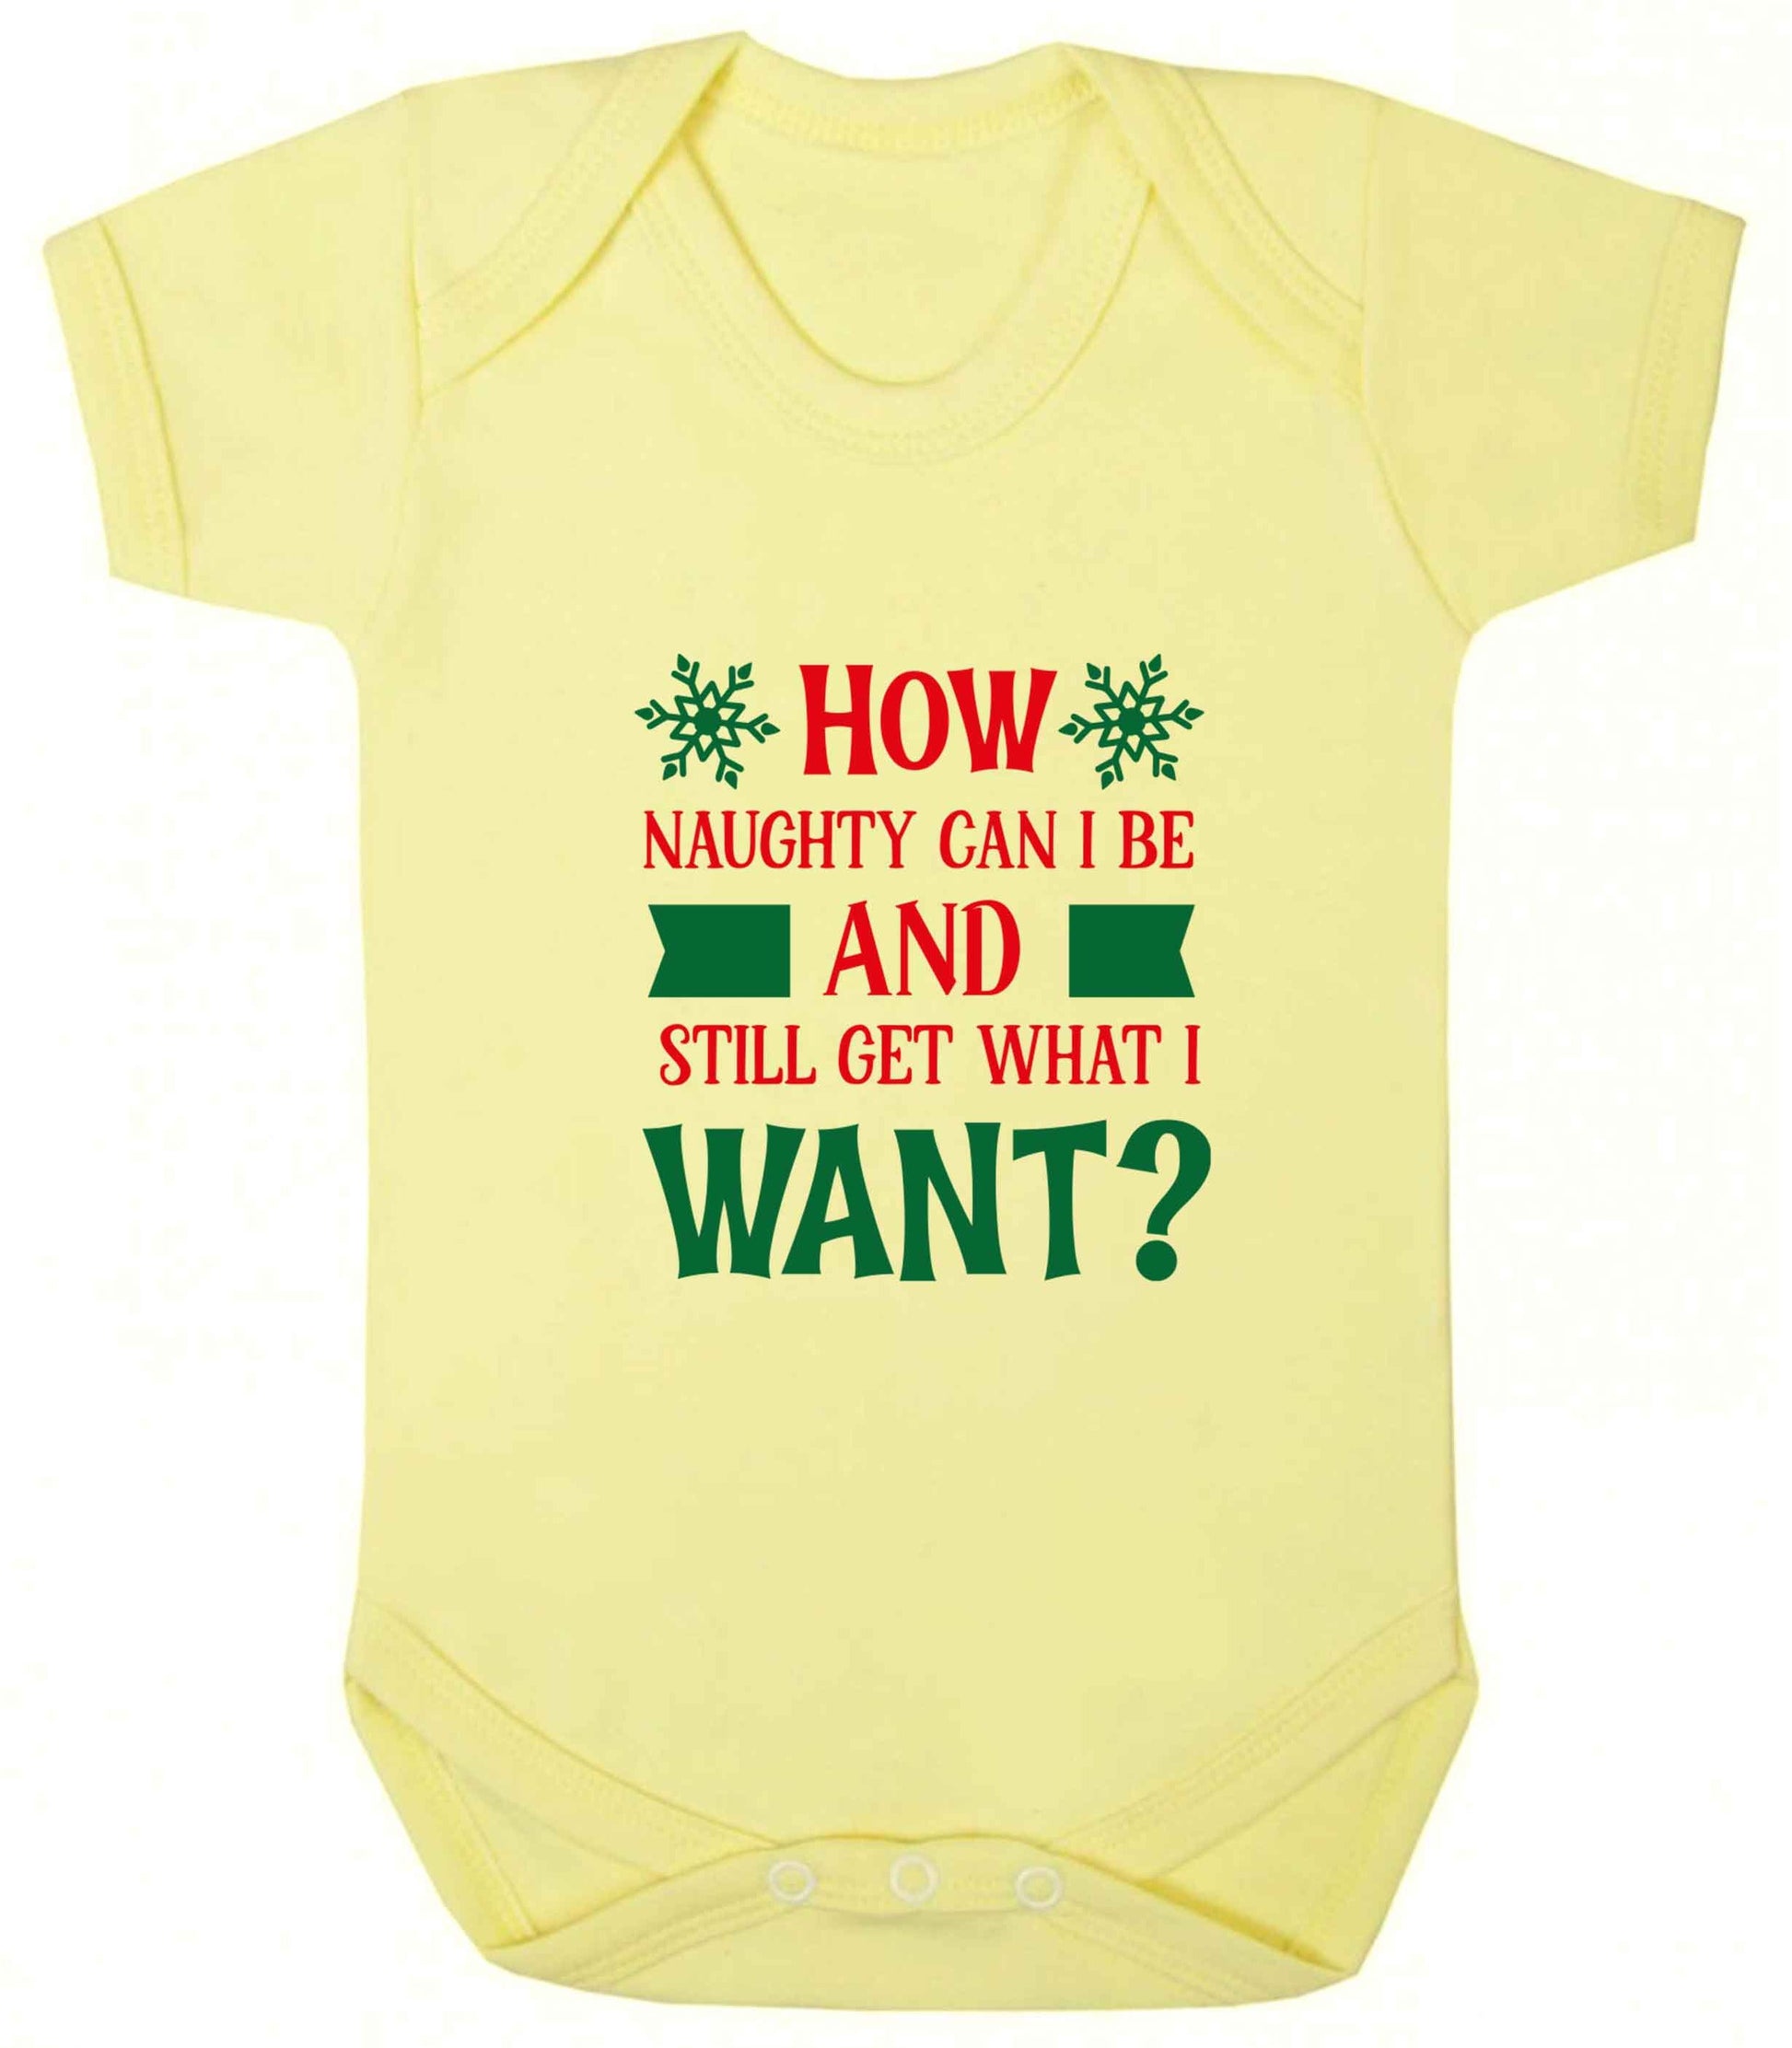 How naughty can I be and still get what I want? baby vest pale yellow 18-24 months